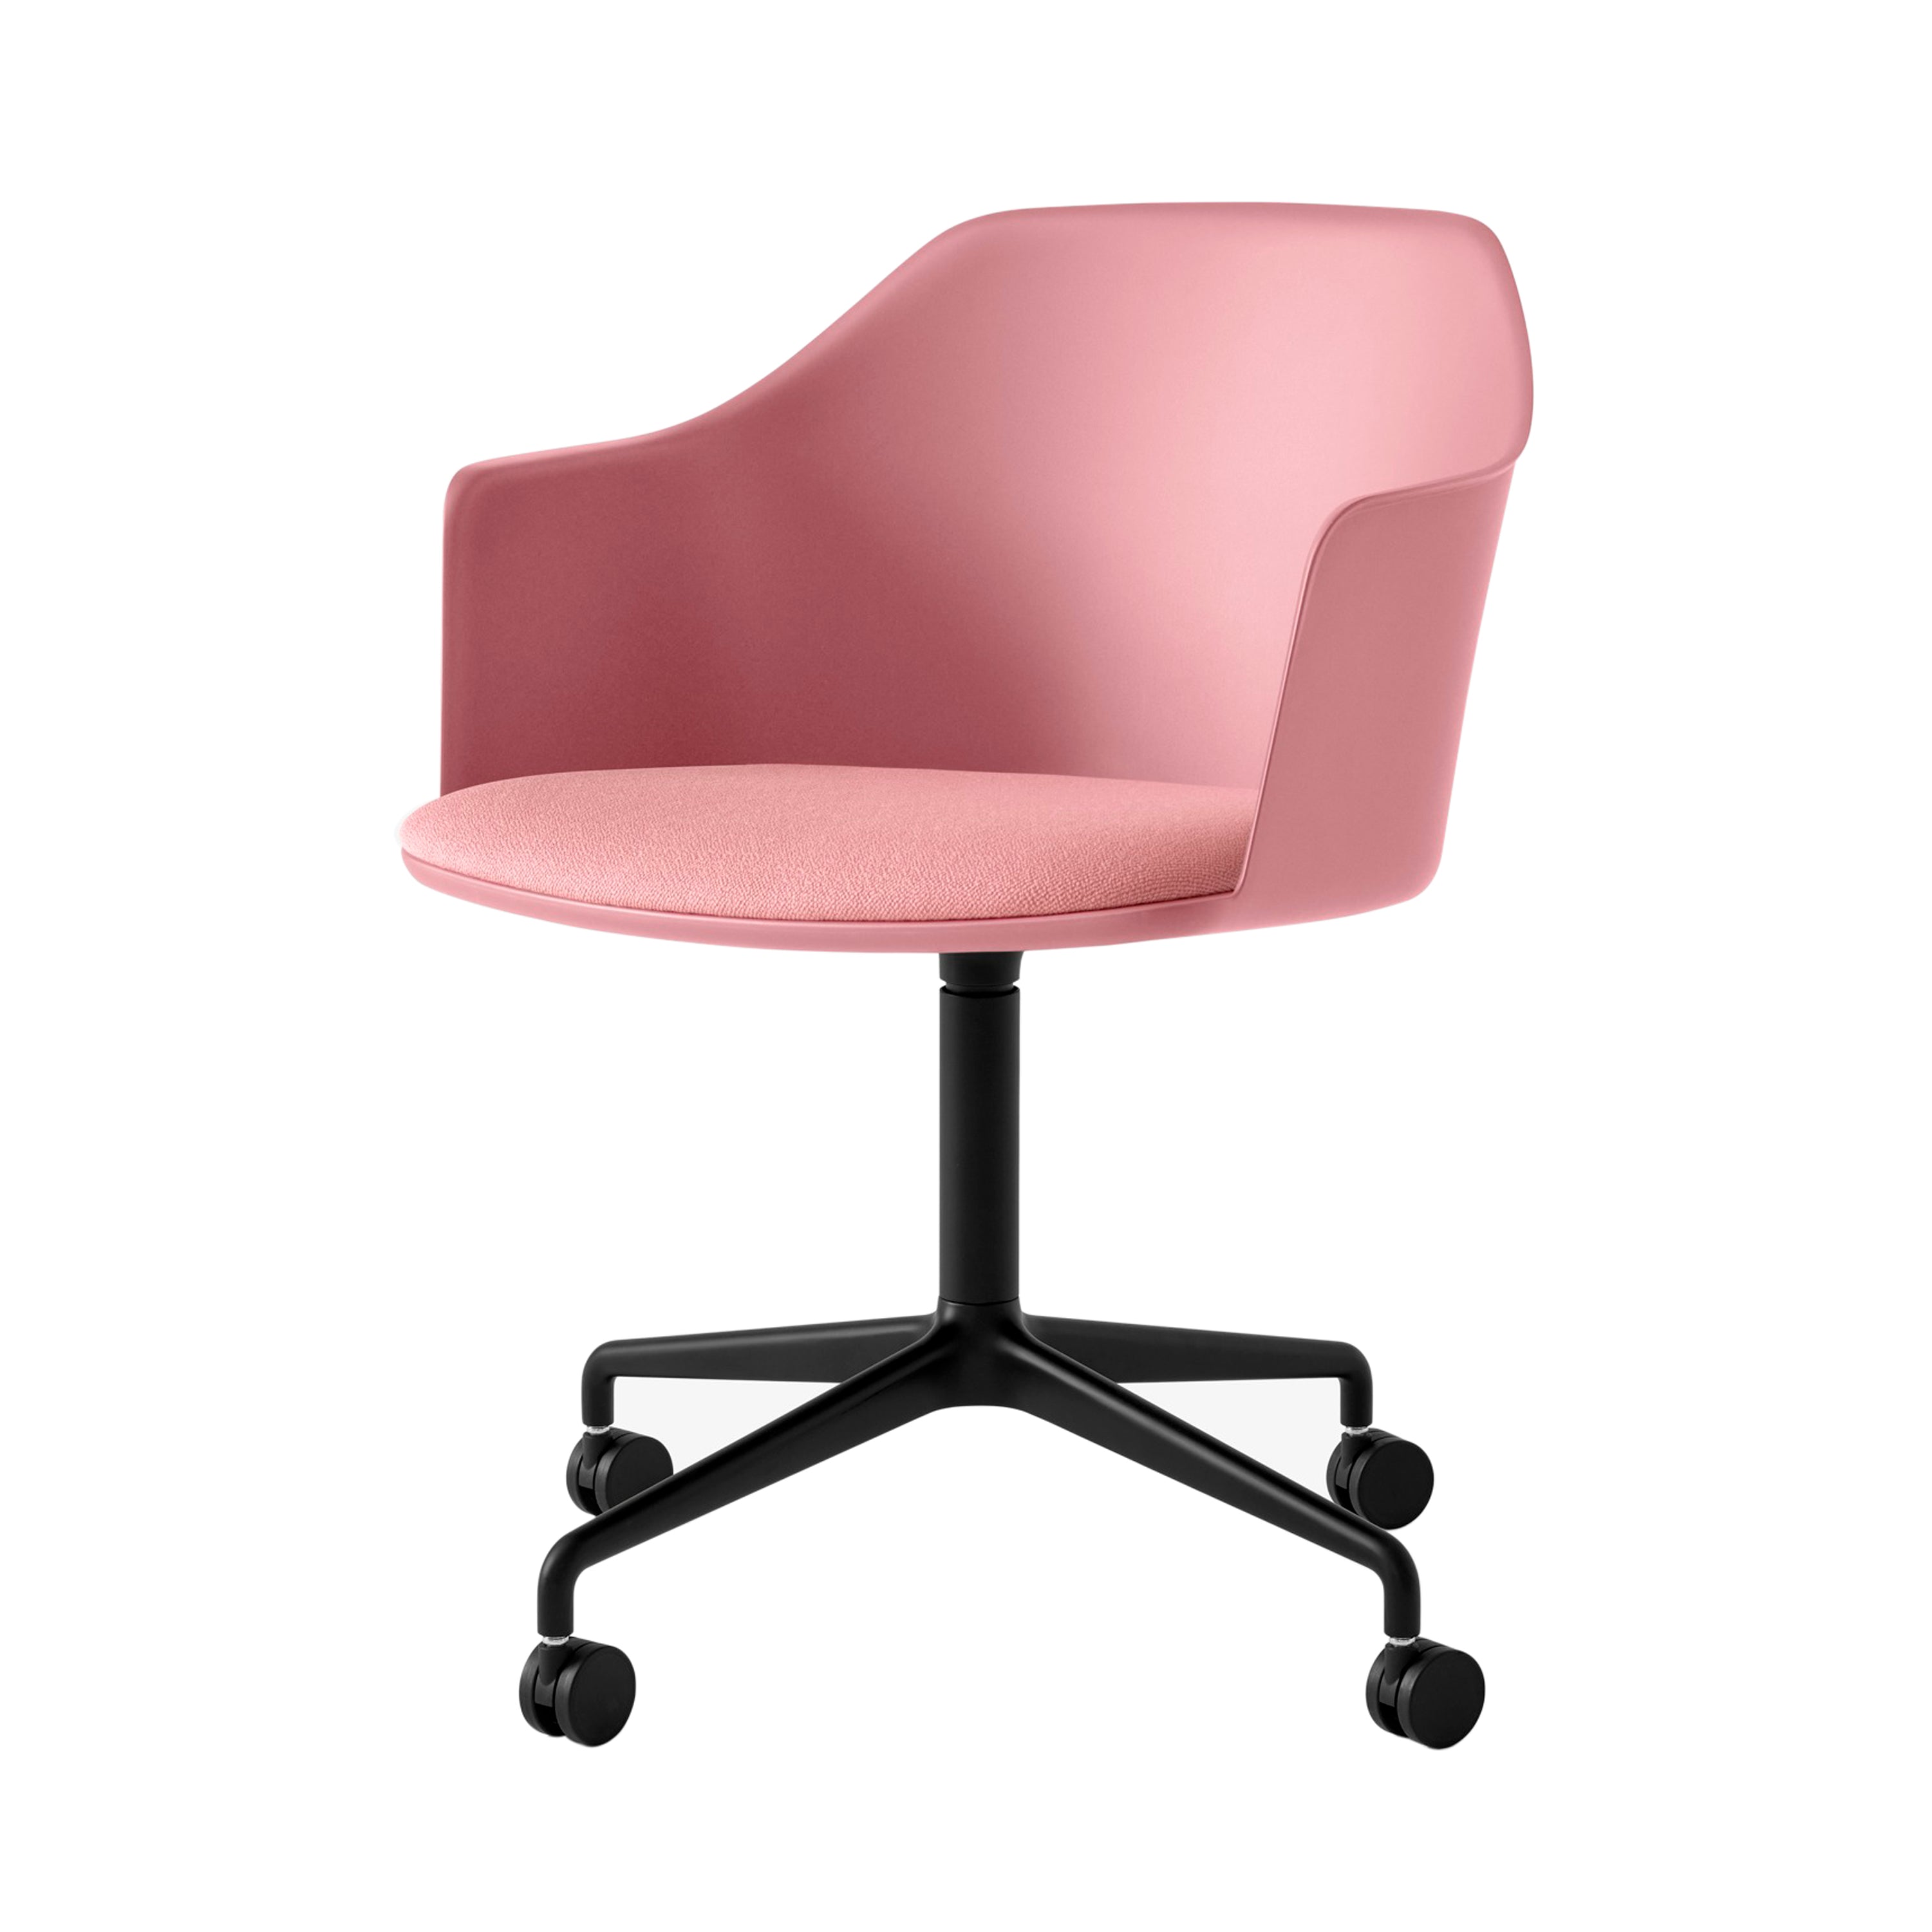 Rely Armchair HW49: Soft Pink + Black